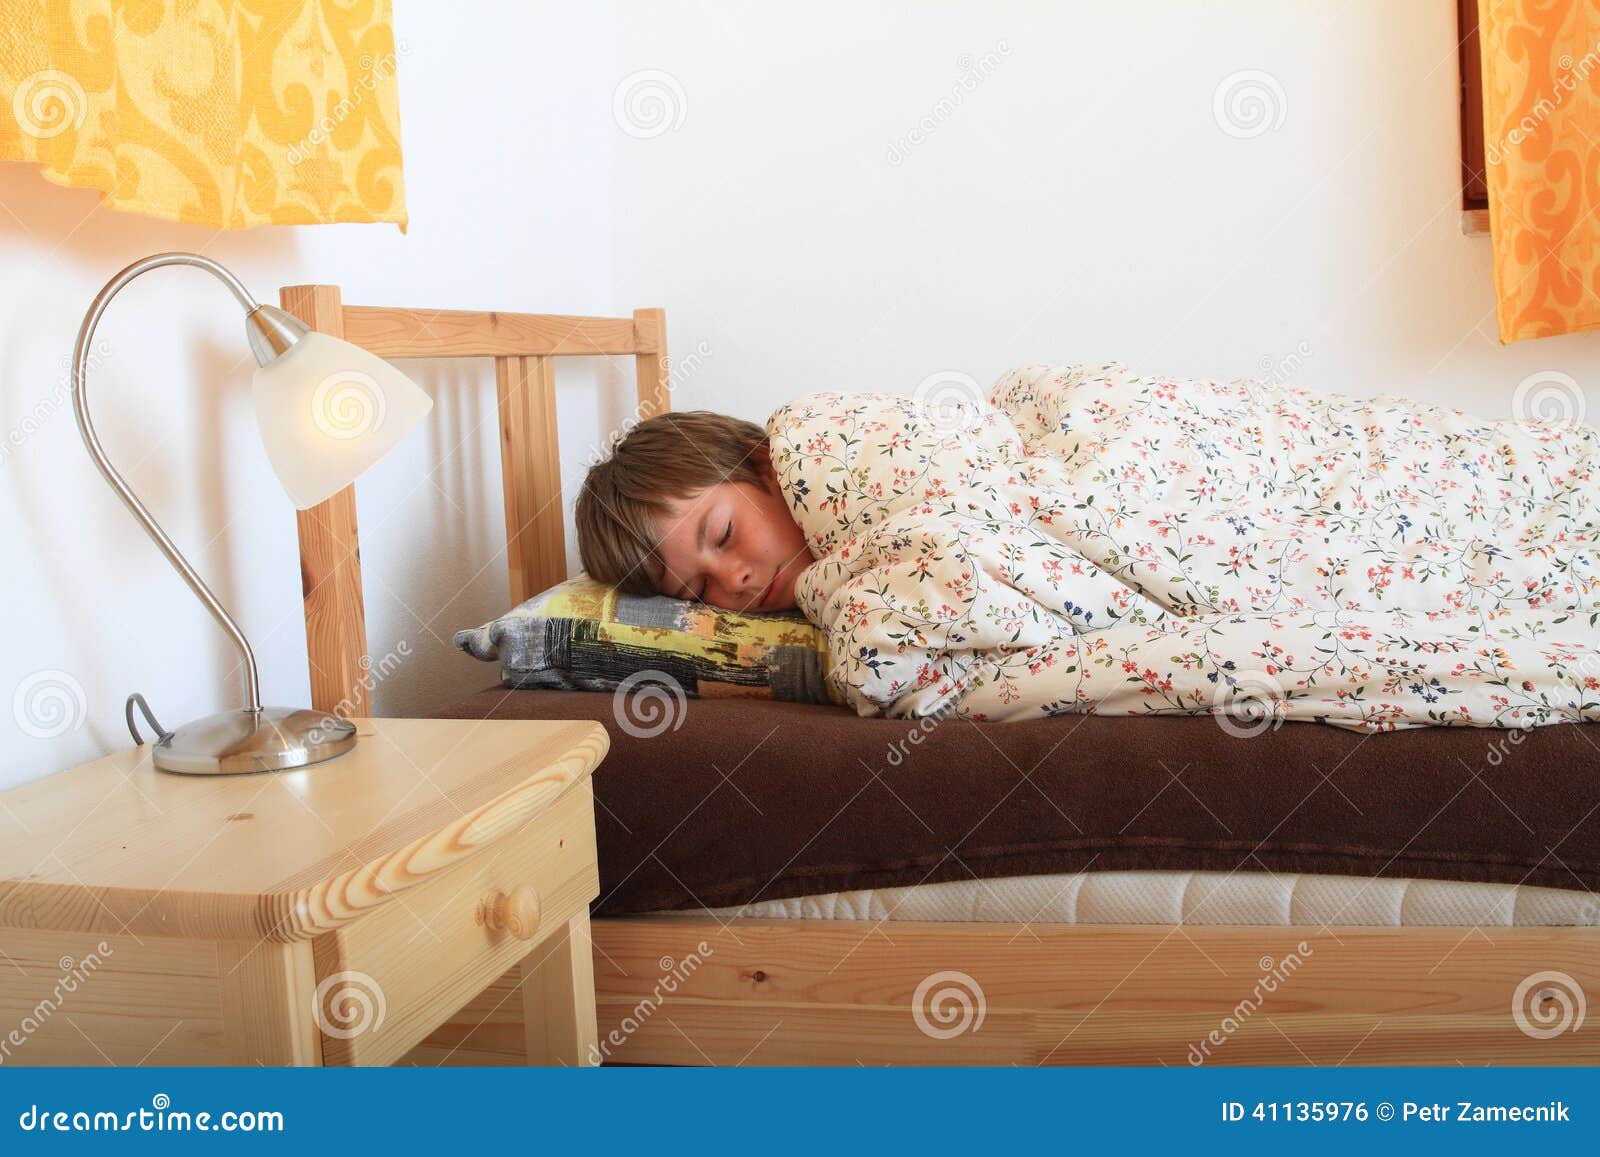 Sleeping boy stock photo. Image of home, flowers, pillow ...